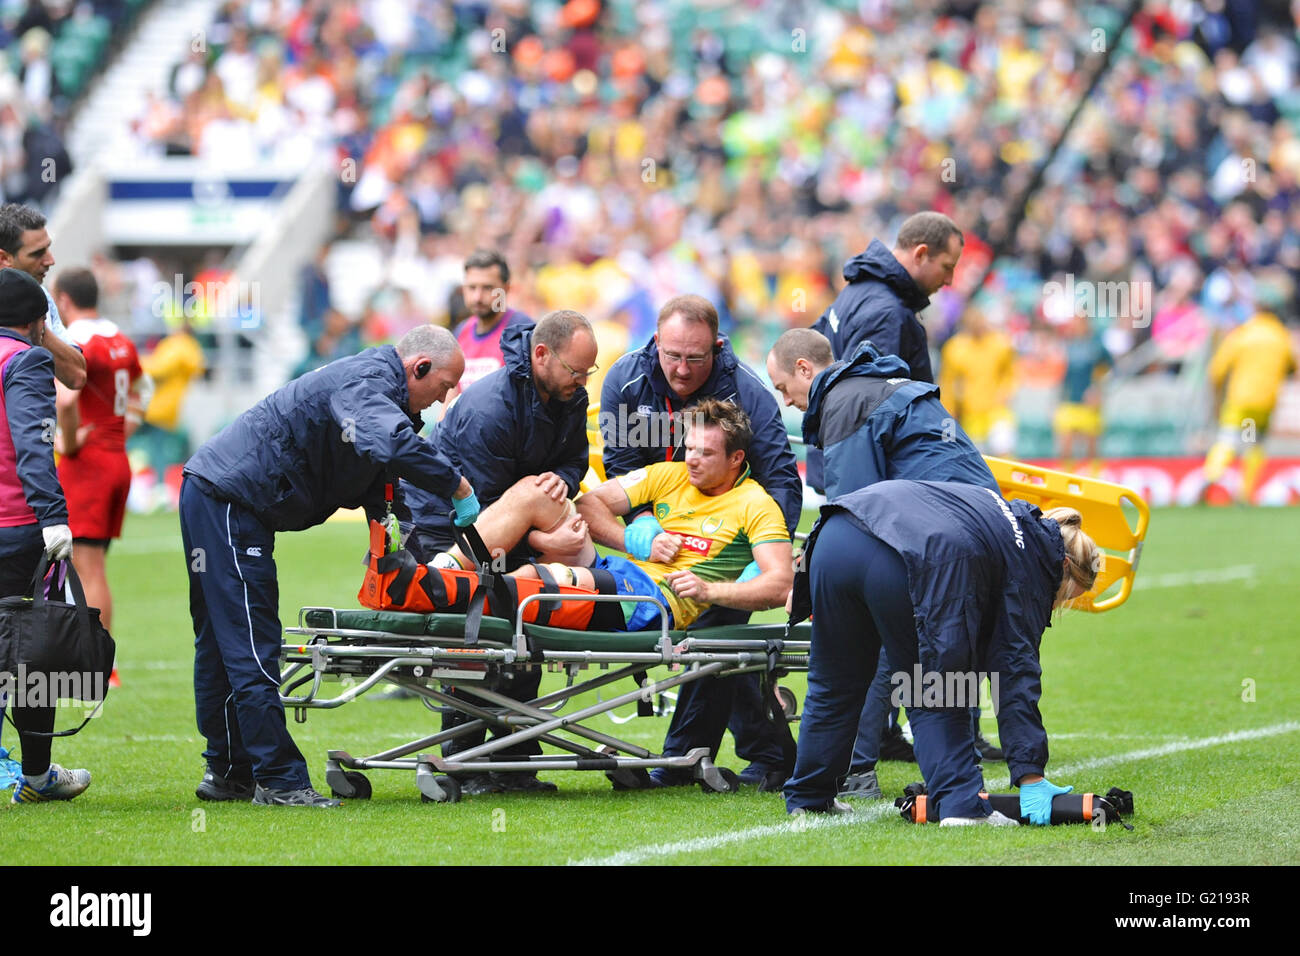 London, UK. 21st May, 2016. Medical personnel coming to the aid of Lucas Muller (BRA) who was left lying on the pitch in agony after an aggressive tackle in the pool match with Russia, HSBC World Rugby Sevens Series, Twickenham Stadium, London, UK. He was eventually stretchered off the pitch. Russia went on to win the match by 14-5. Credit:  Michael Preston/Alamy Live News Stock Photo